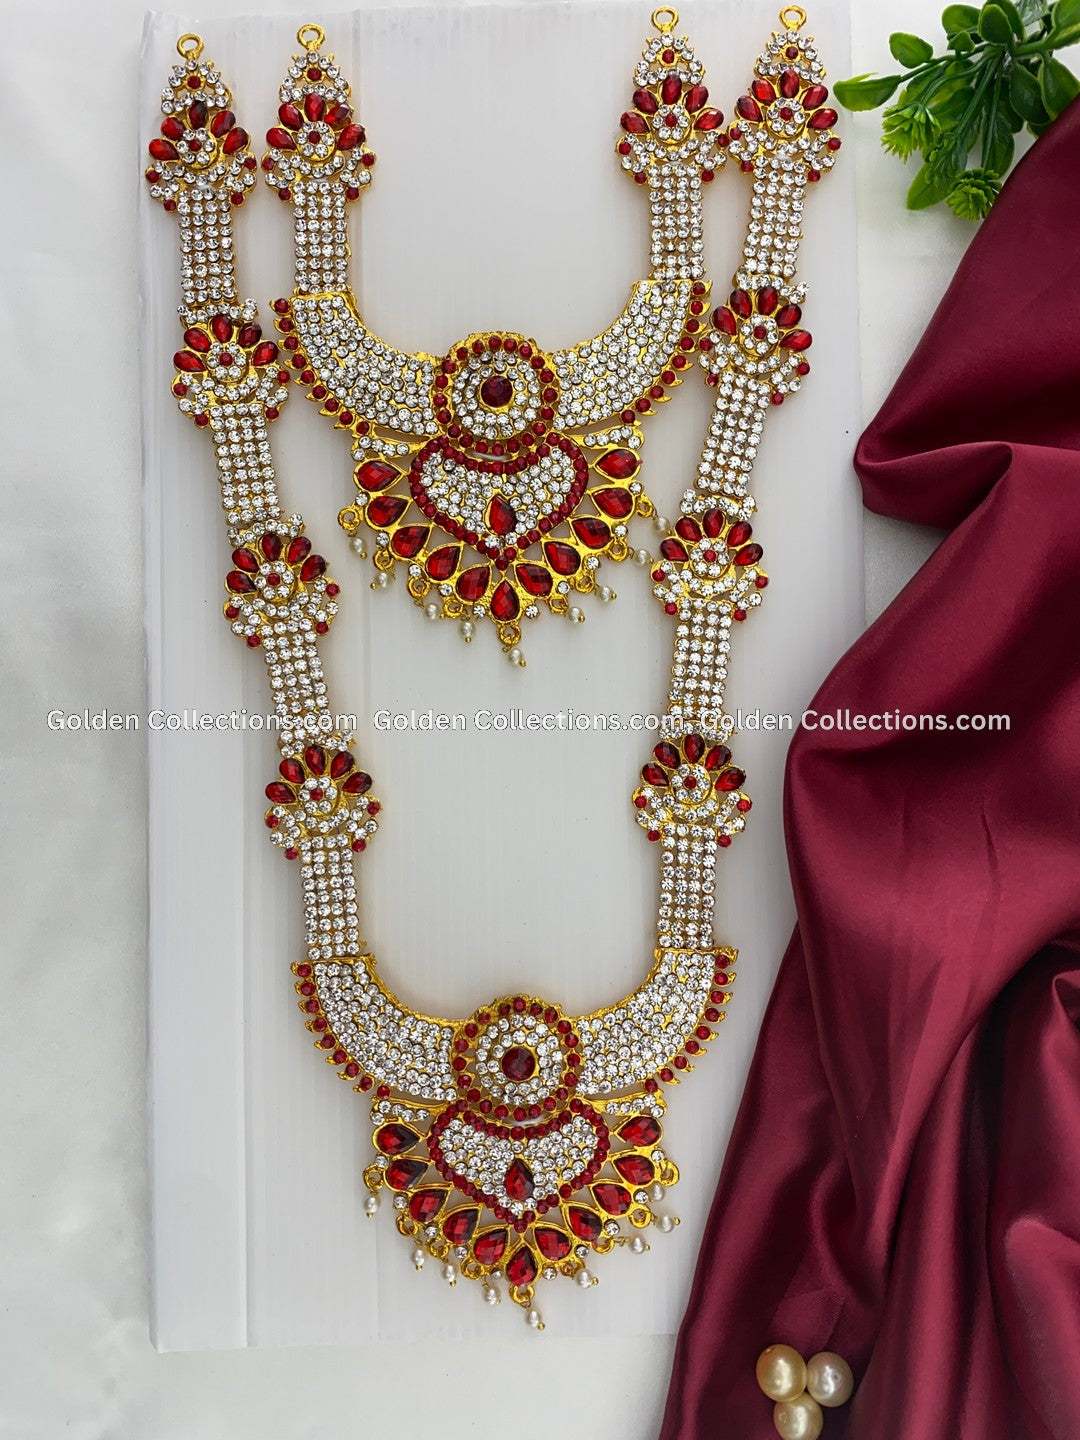 Ornate Deity Long Necklace-GoldenCollections